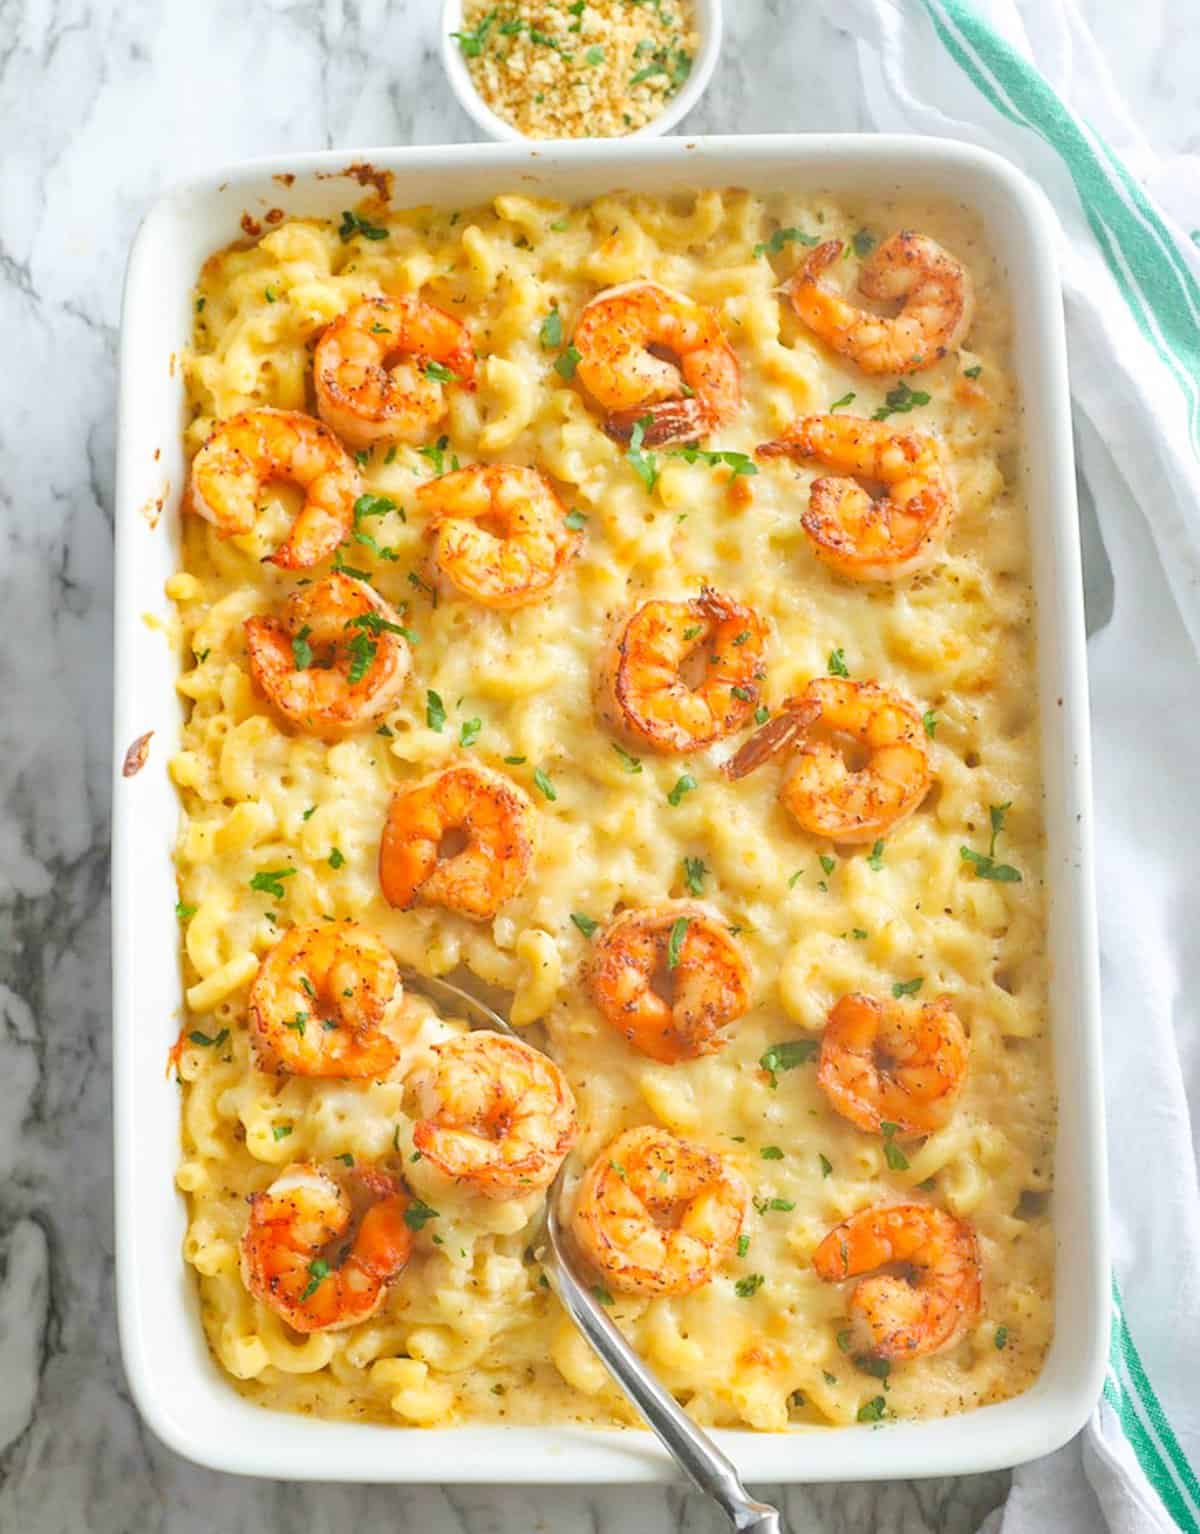 Serving up ridiculously delicious mac and cheese with shrimp